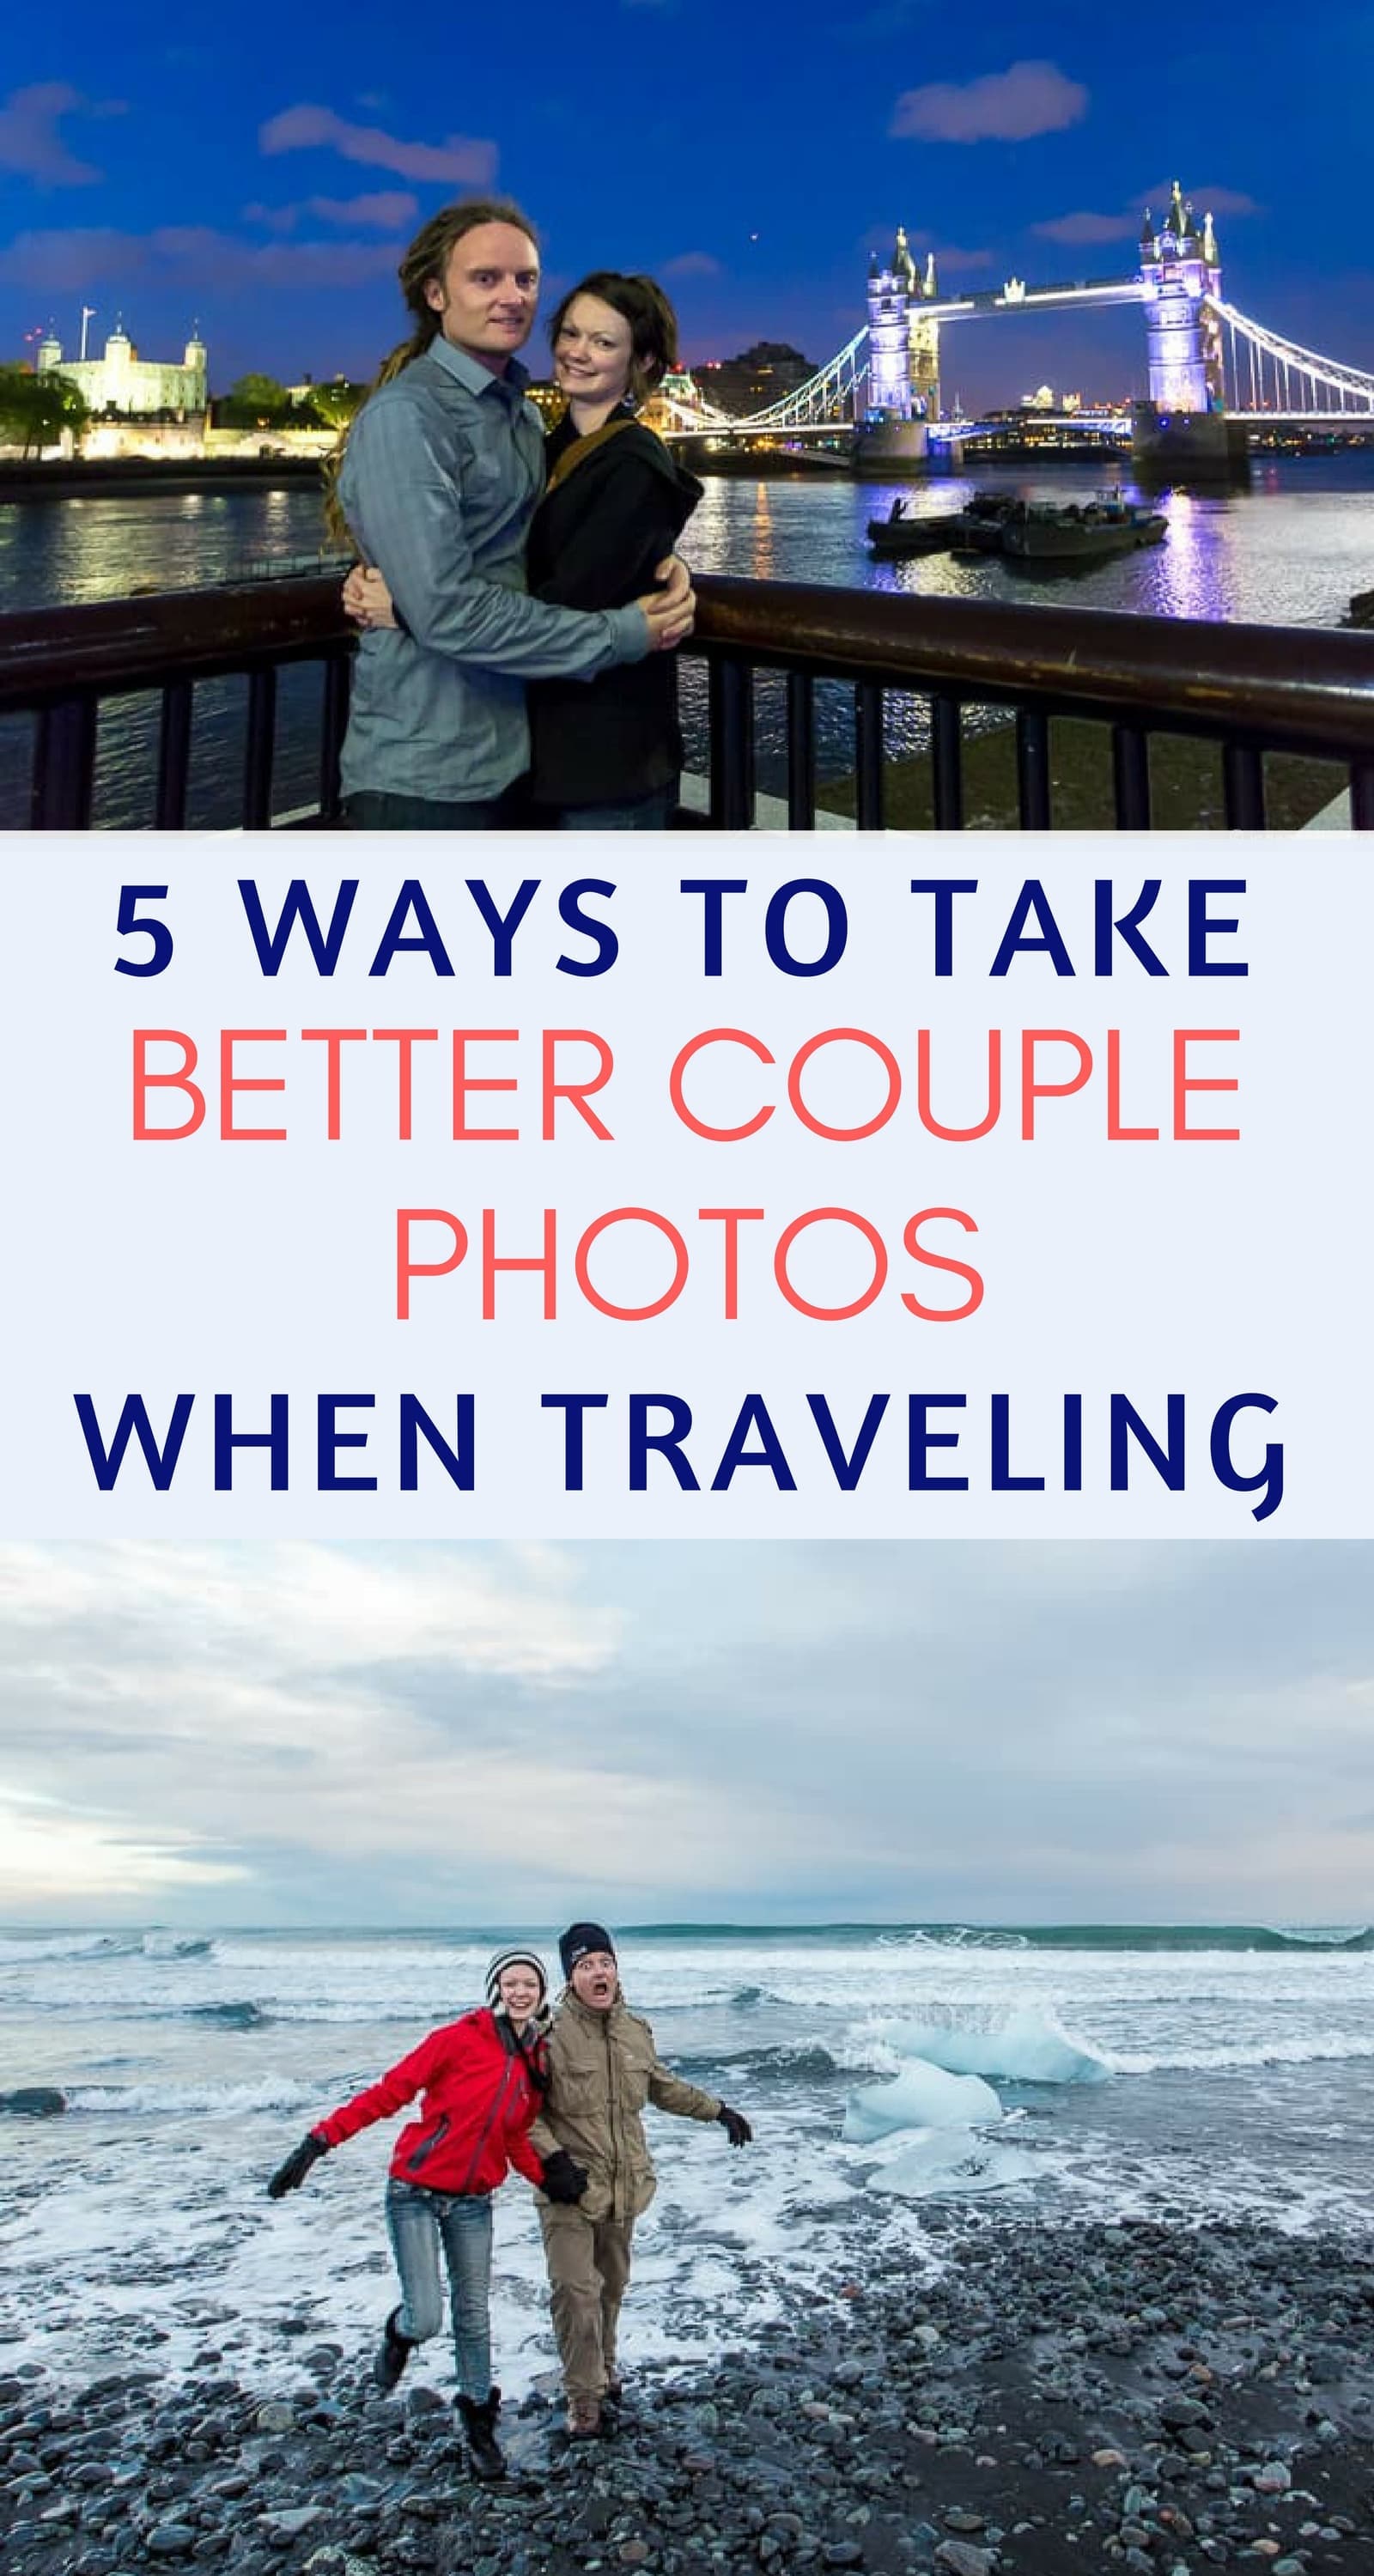 Our guide to taking great couple photos while traveling, sharing all the methods and strategies we have used. We cover everything from selfie sticks to tripods to hiring a professional photographer, and we discuss the pros and cons of each option. We then give tips and advice for getting the best travel couple photos while traveling no matter what method you choose. #travelphotography #couplephotos #couplestravel #romantictravel #photography